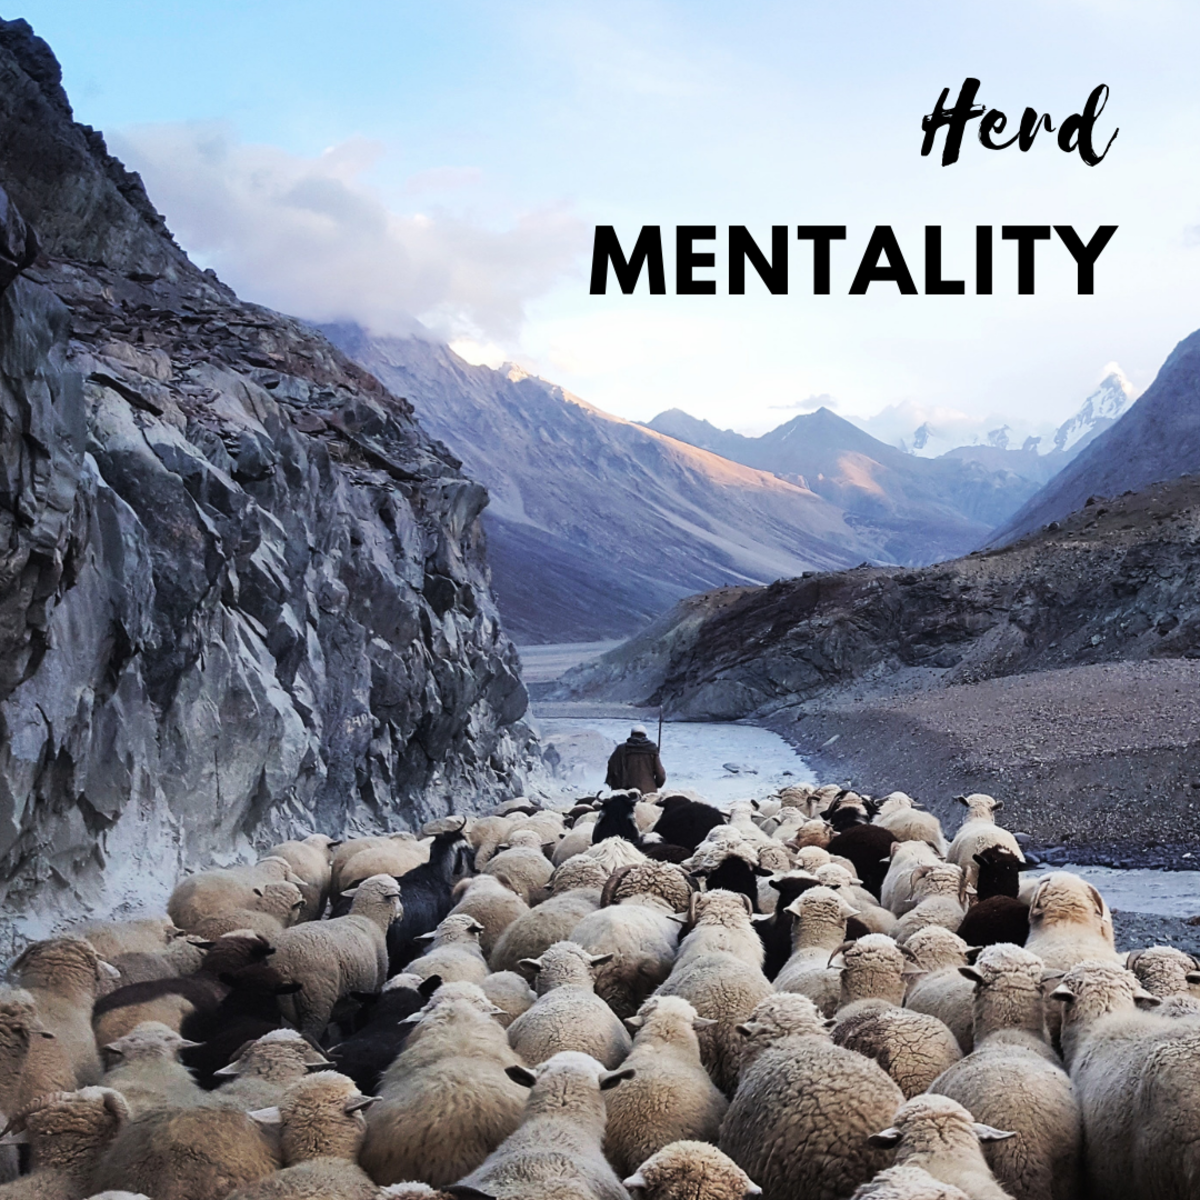 What You Need to Know About Herd Mentality